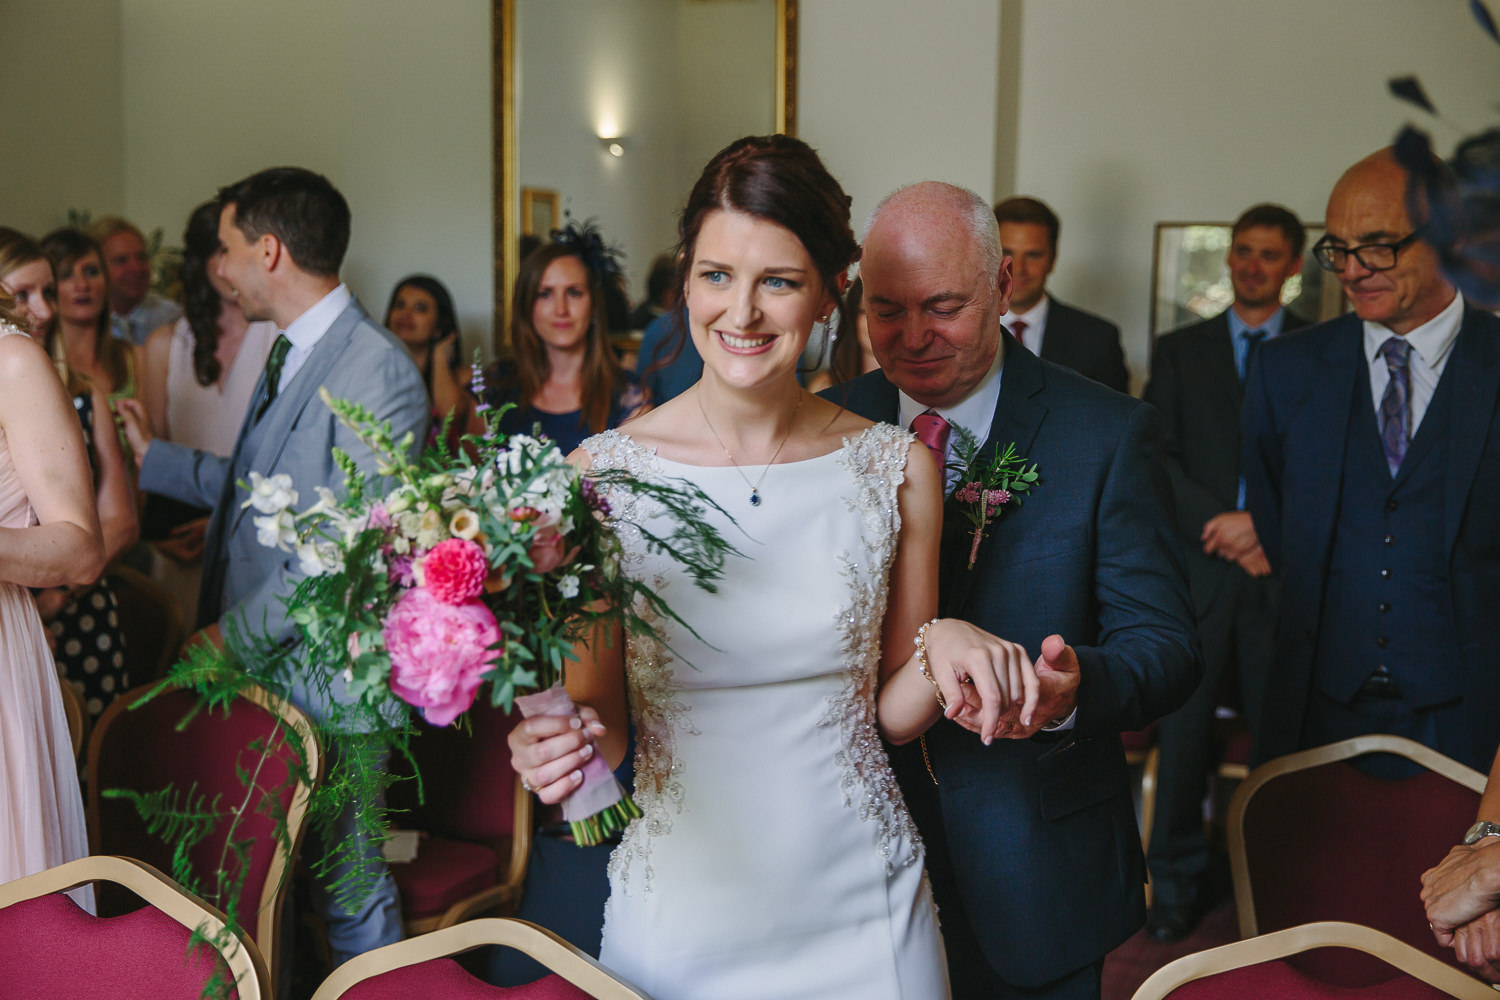 Bride arriving for the wedding ceremony inside Ely registry office, photographed by an Ely Wedding Photographer